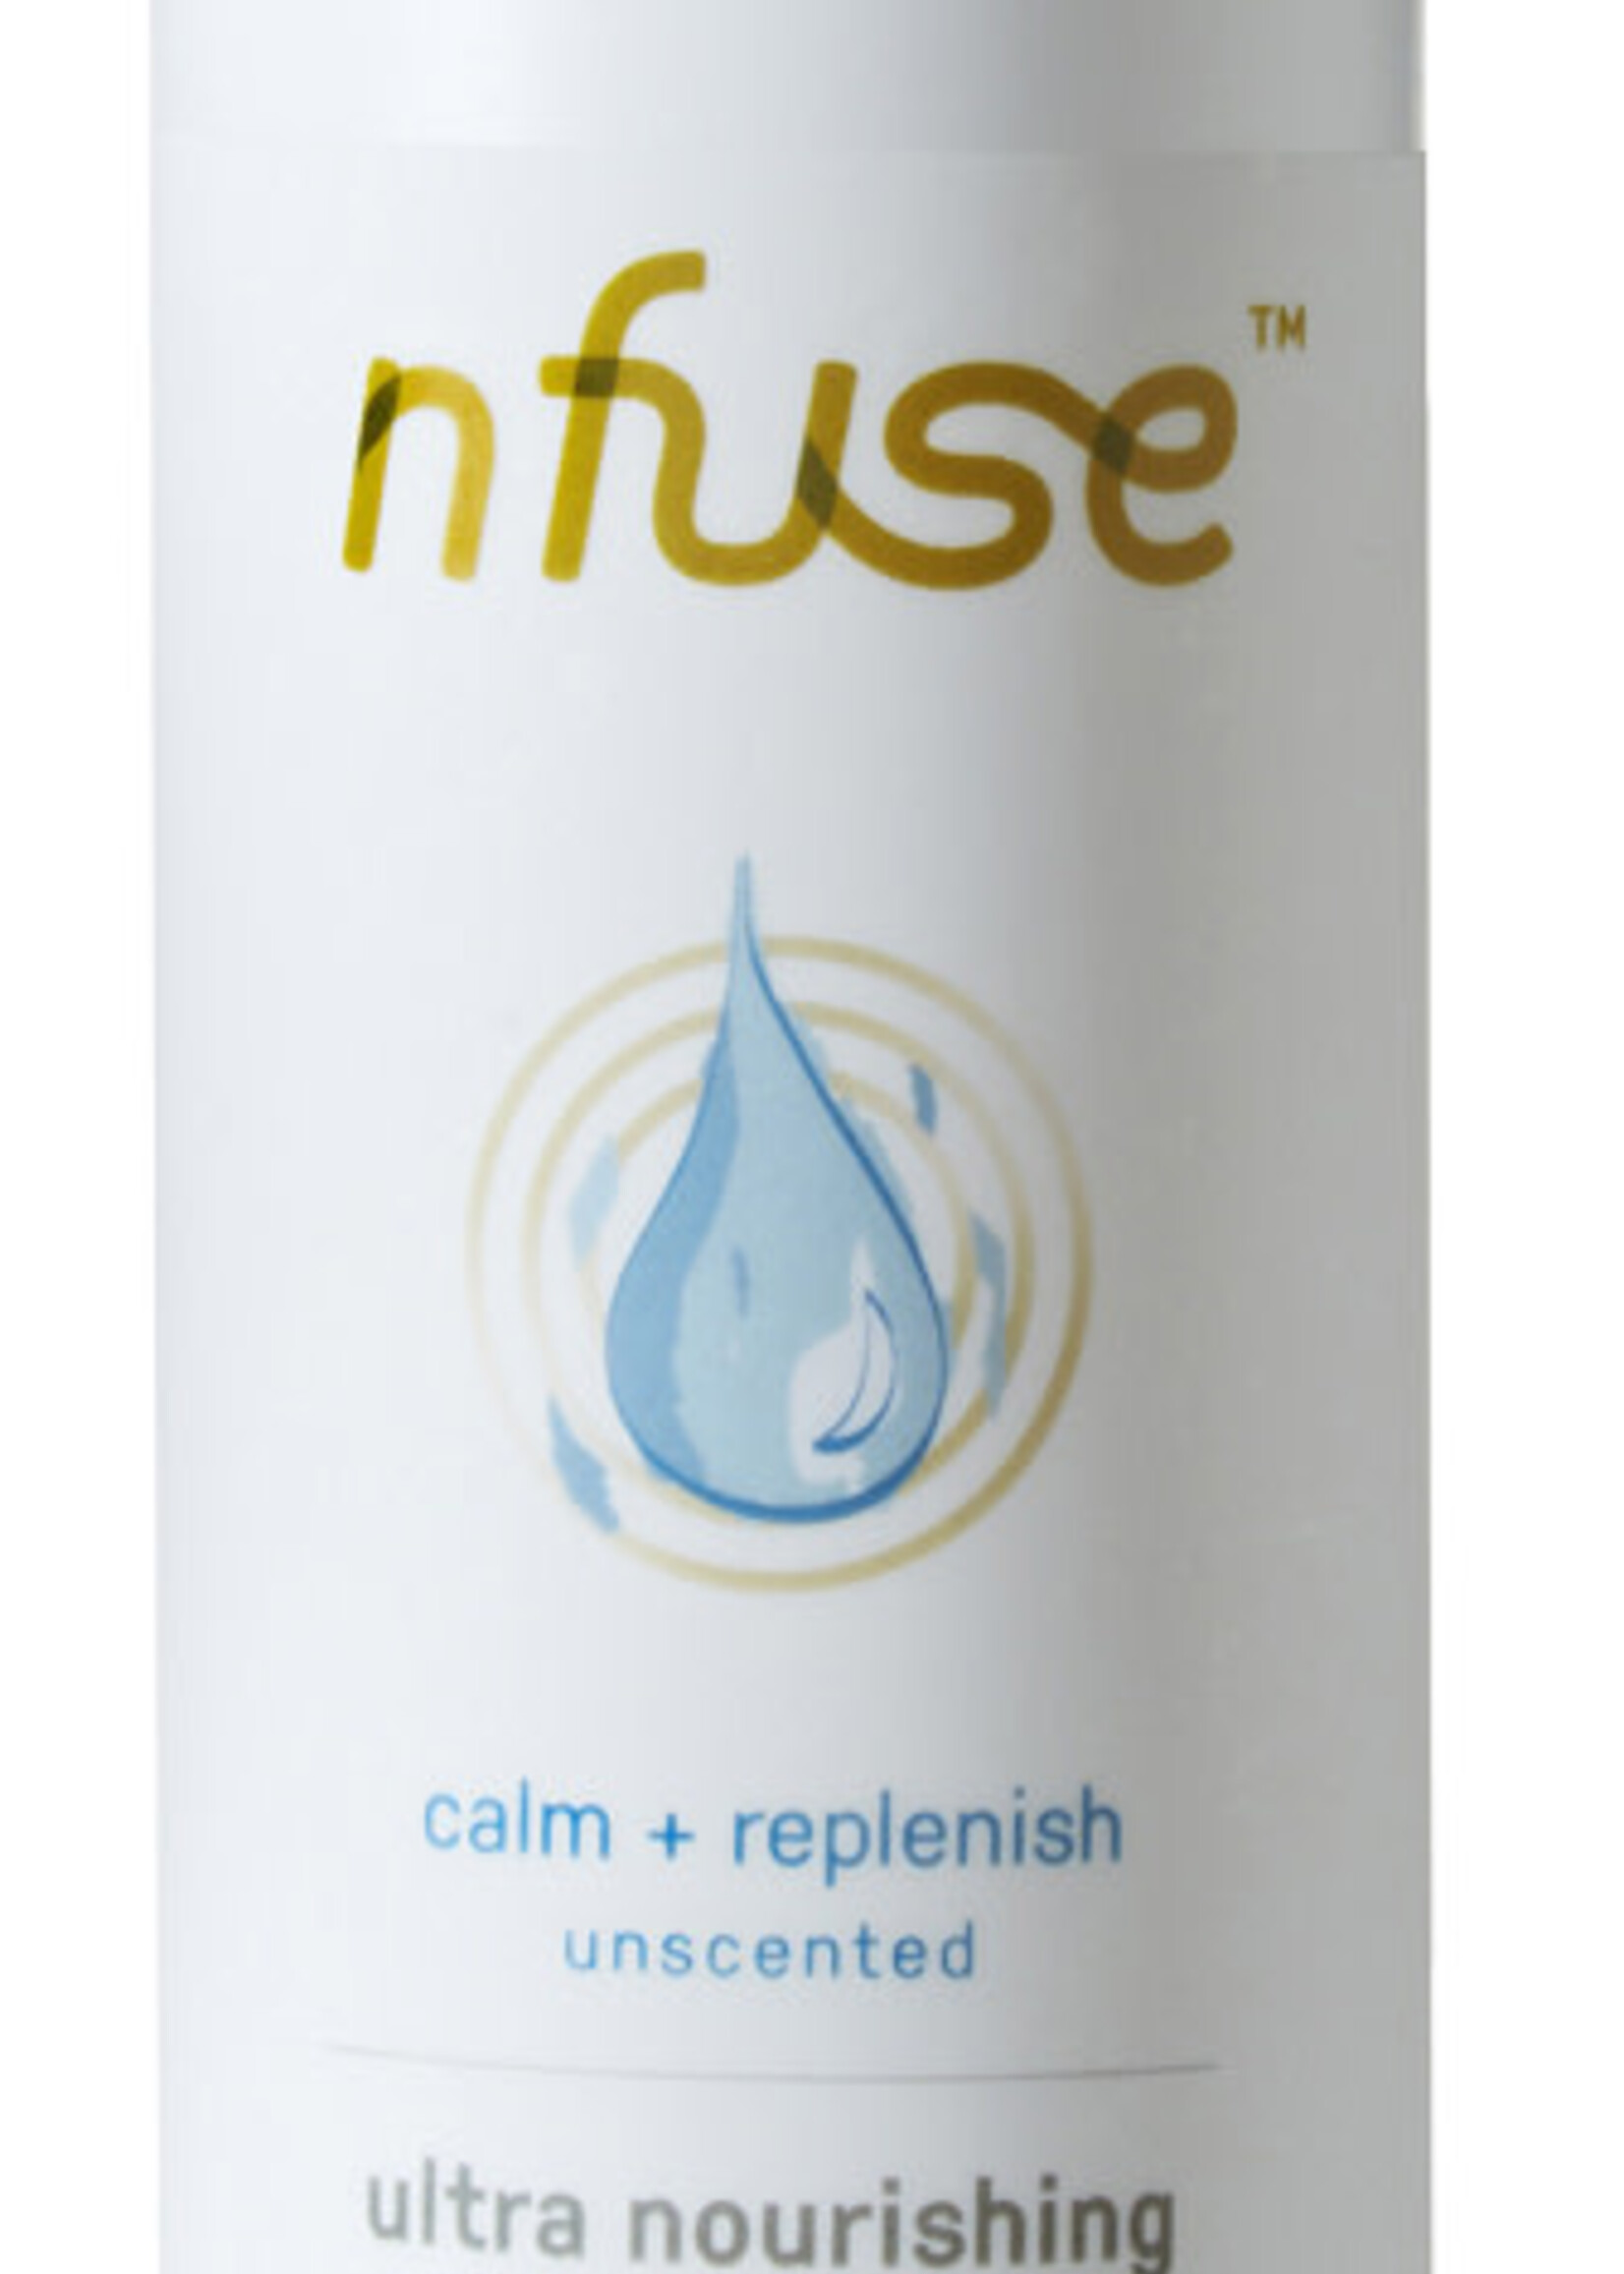 NFuse LLC Unscented Magnesium Lotion